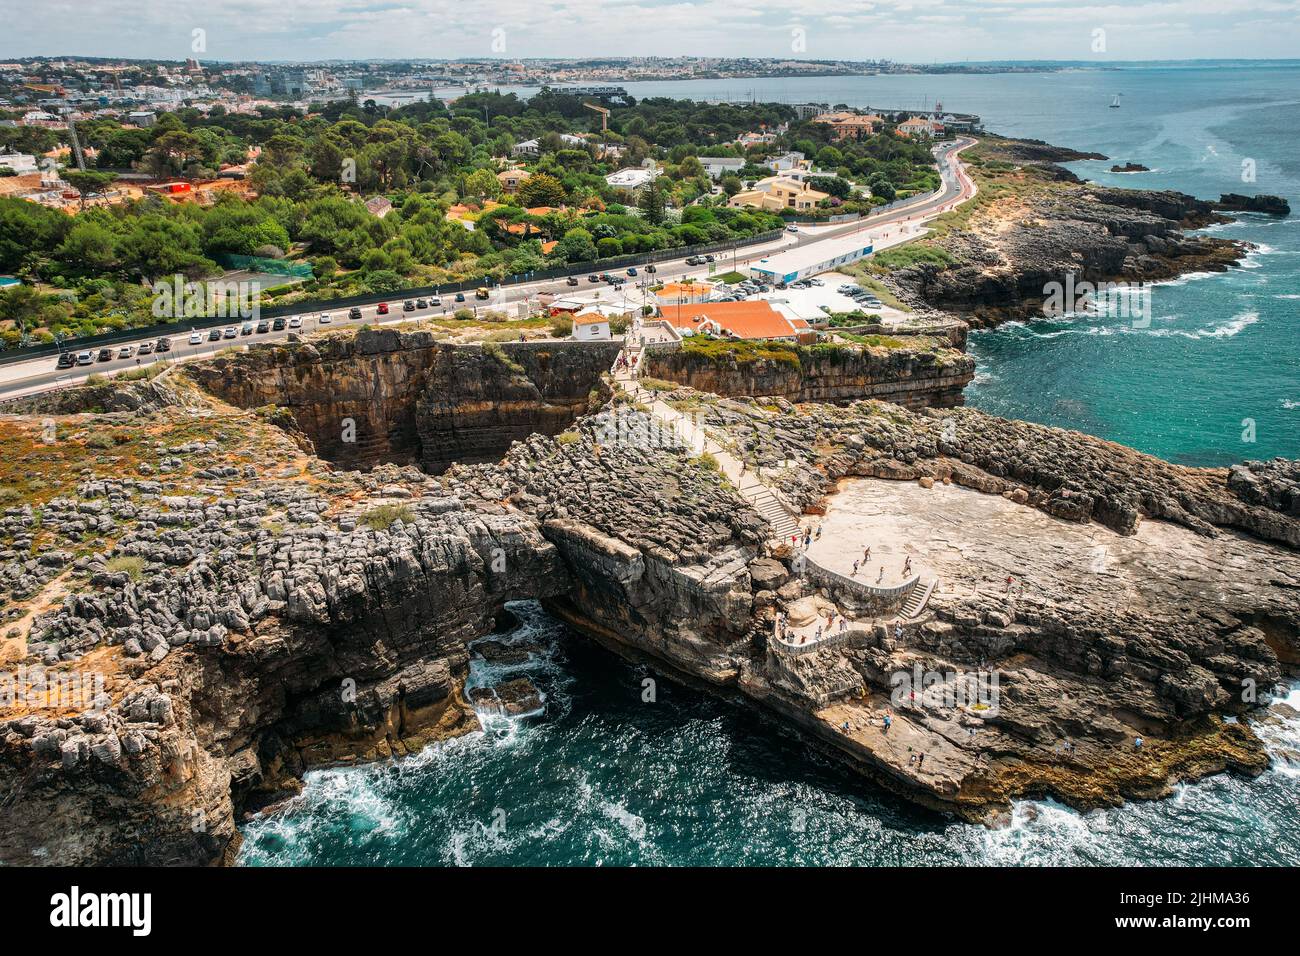 Boca do Inferno which is Portuguese for Hell's mouth in Cascais, Portugal Stock Photo